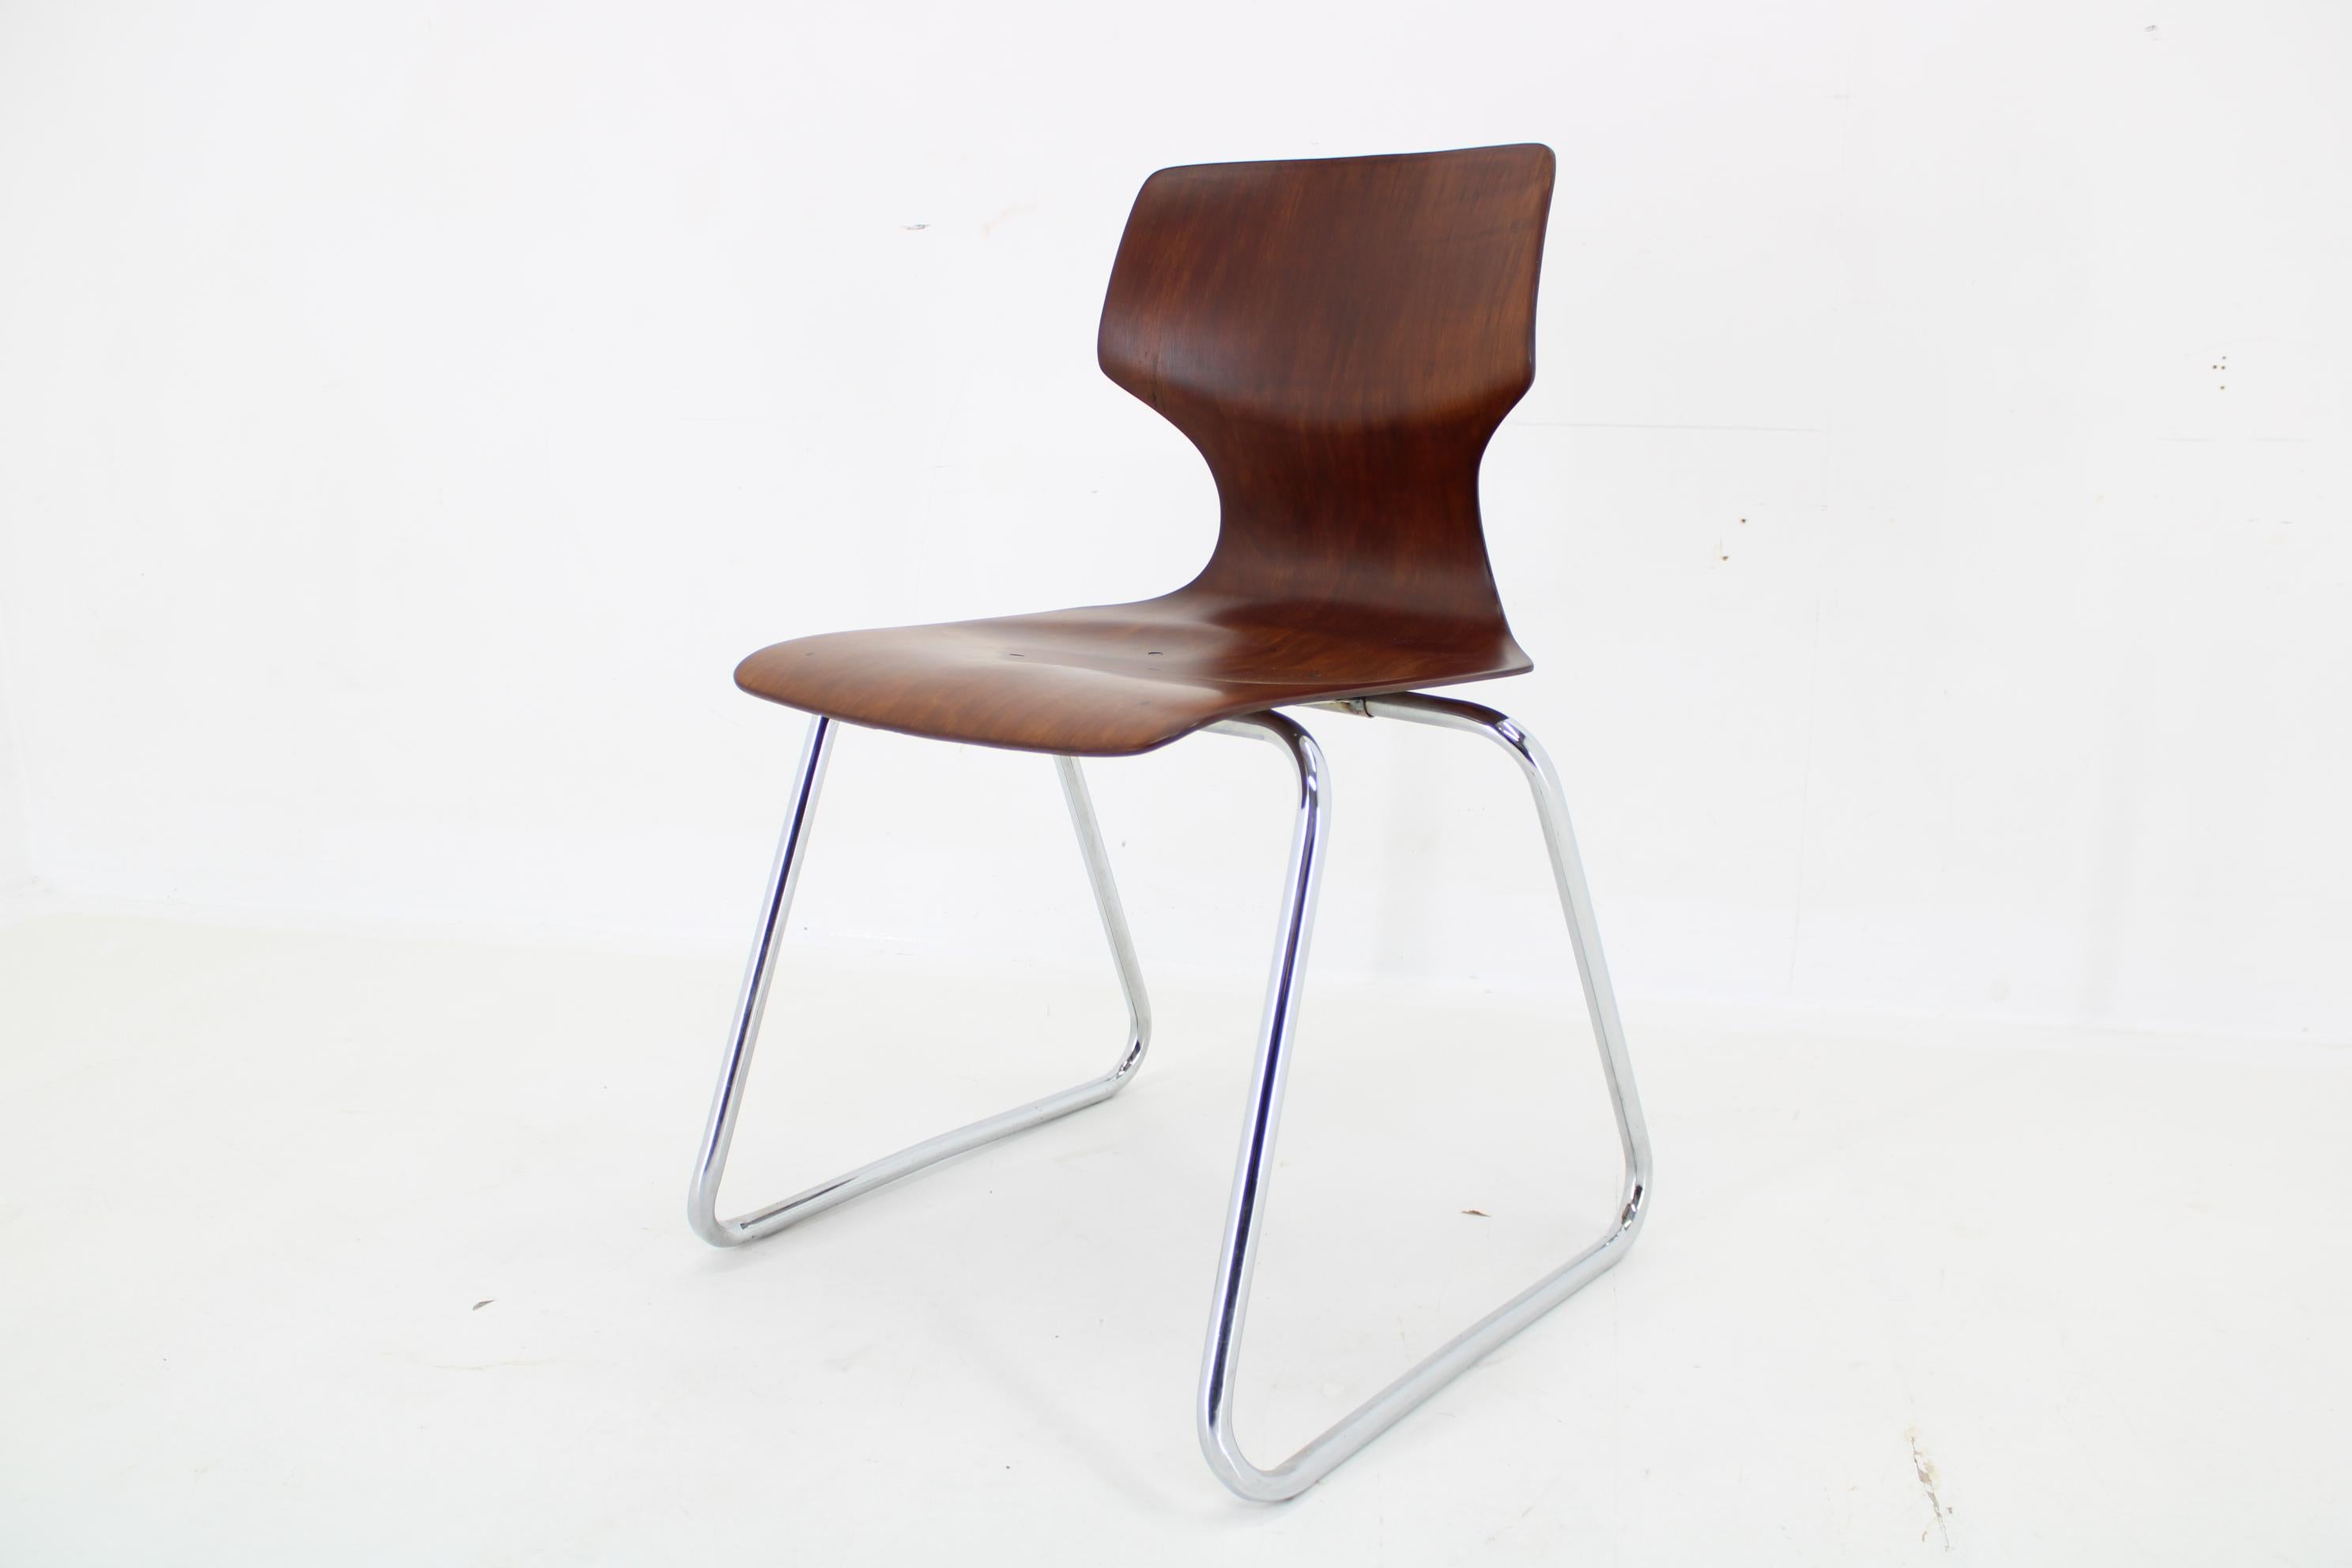 Late 20th Century 1970s Elmar Flototto Dining or Side Chair, Germany -40 Pieces Available For Sale